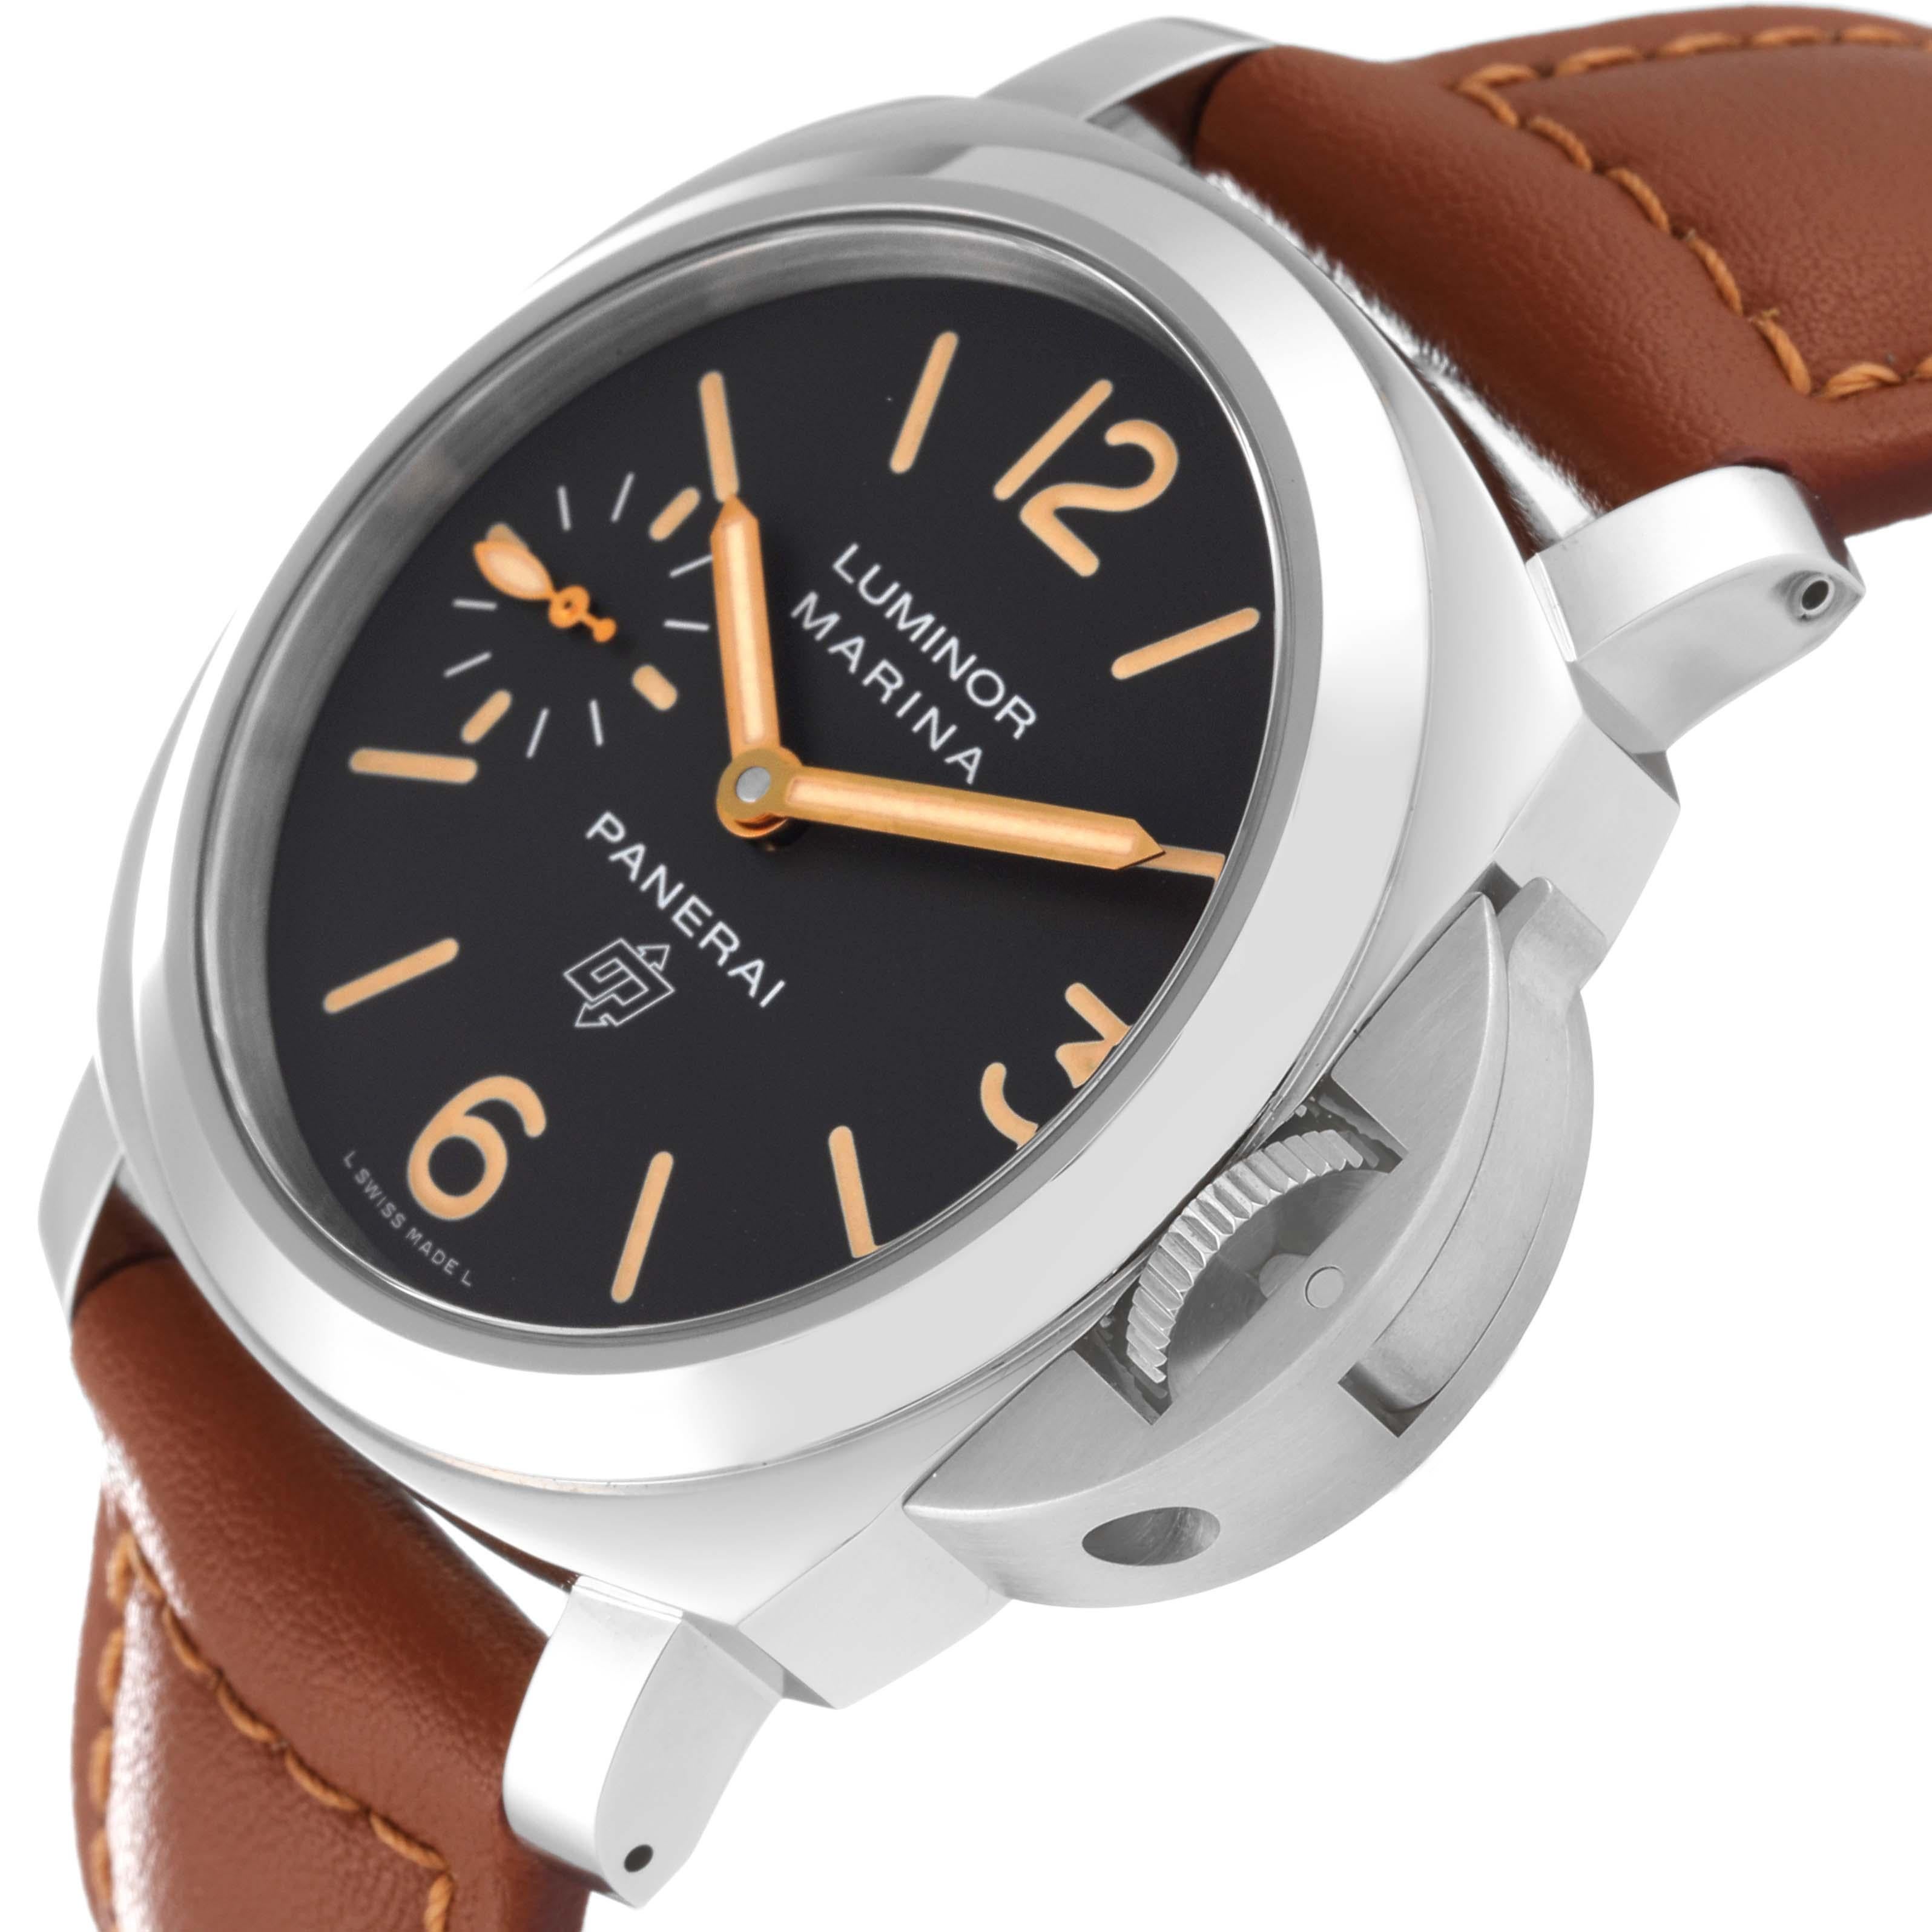 Panerai Luminor Acciaio Logo Tropical Brown Dial Steel Mens Watch PAM00632 Box Card. Manual winding movement. Stainless steel cushion shaped case 44 mm in diameter. Panerai patented crown protector. Stainless steel sloped bezel. Scratch resistant